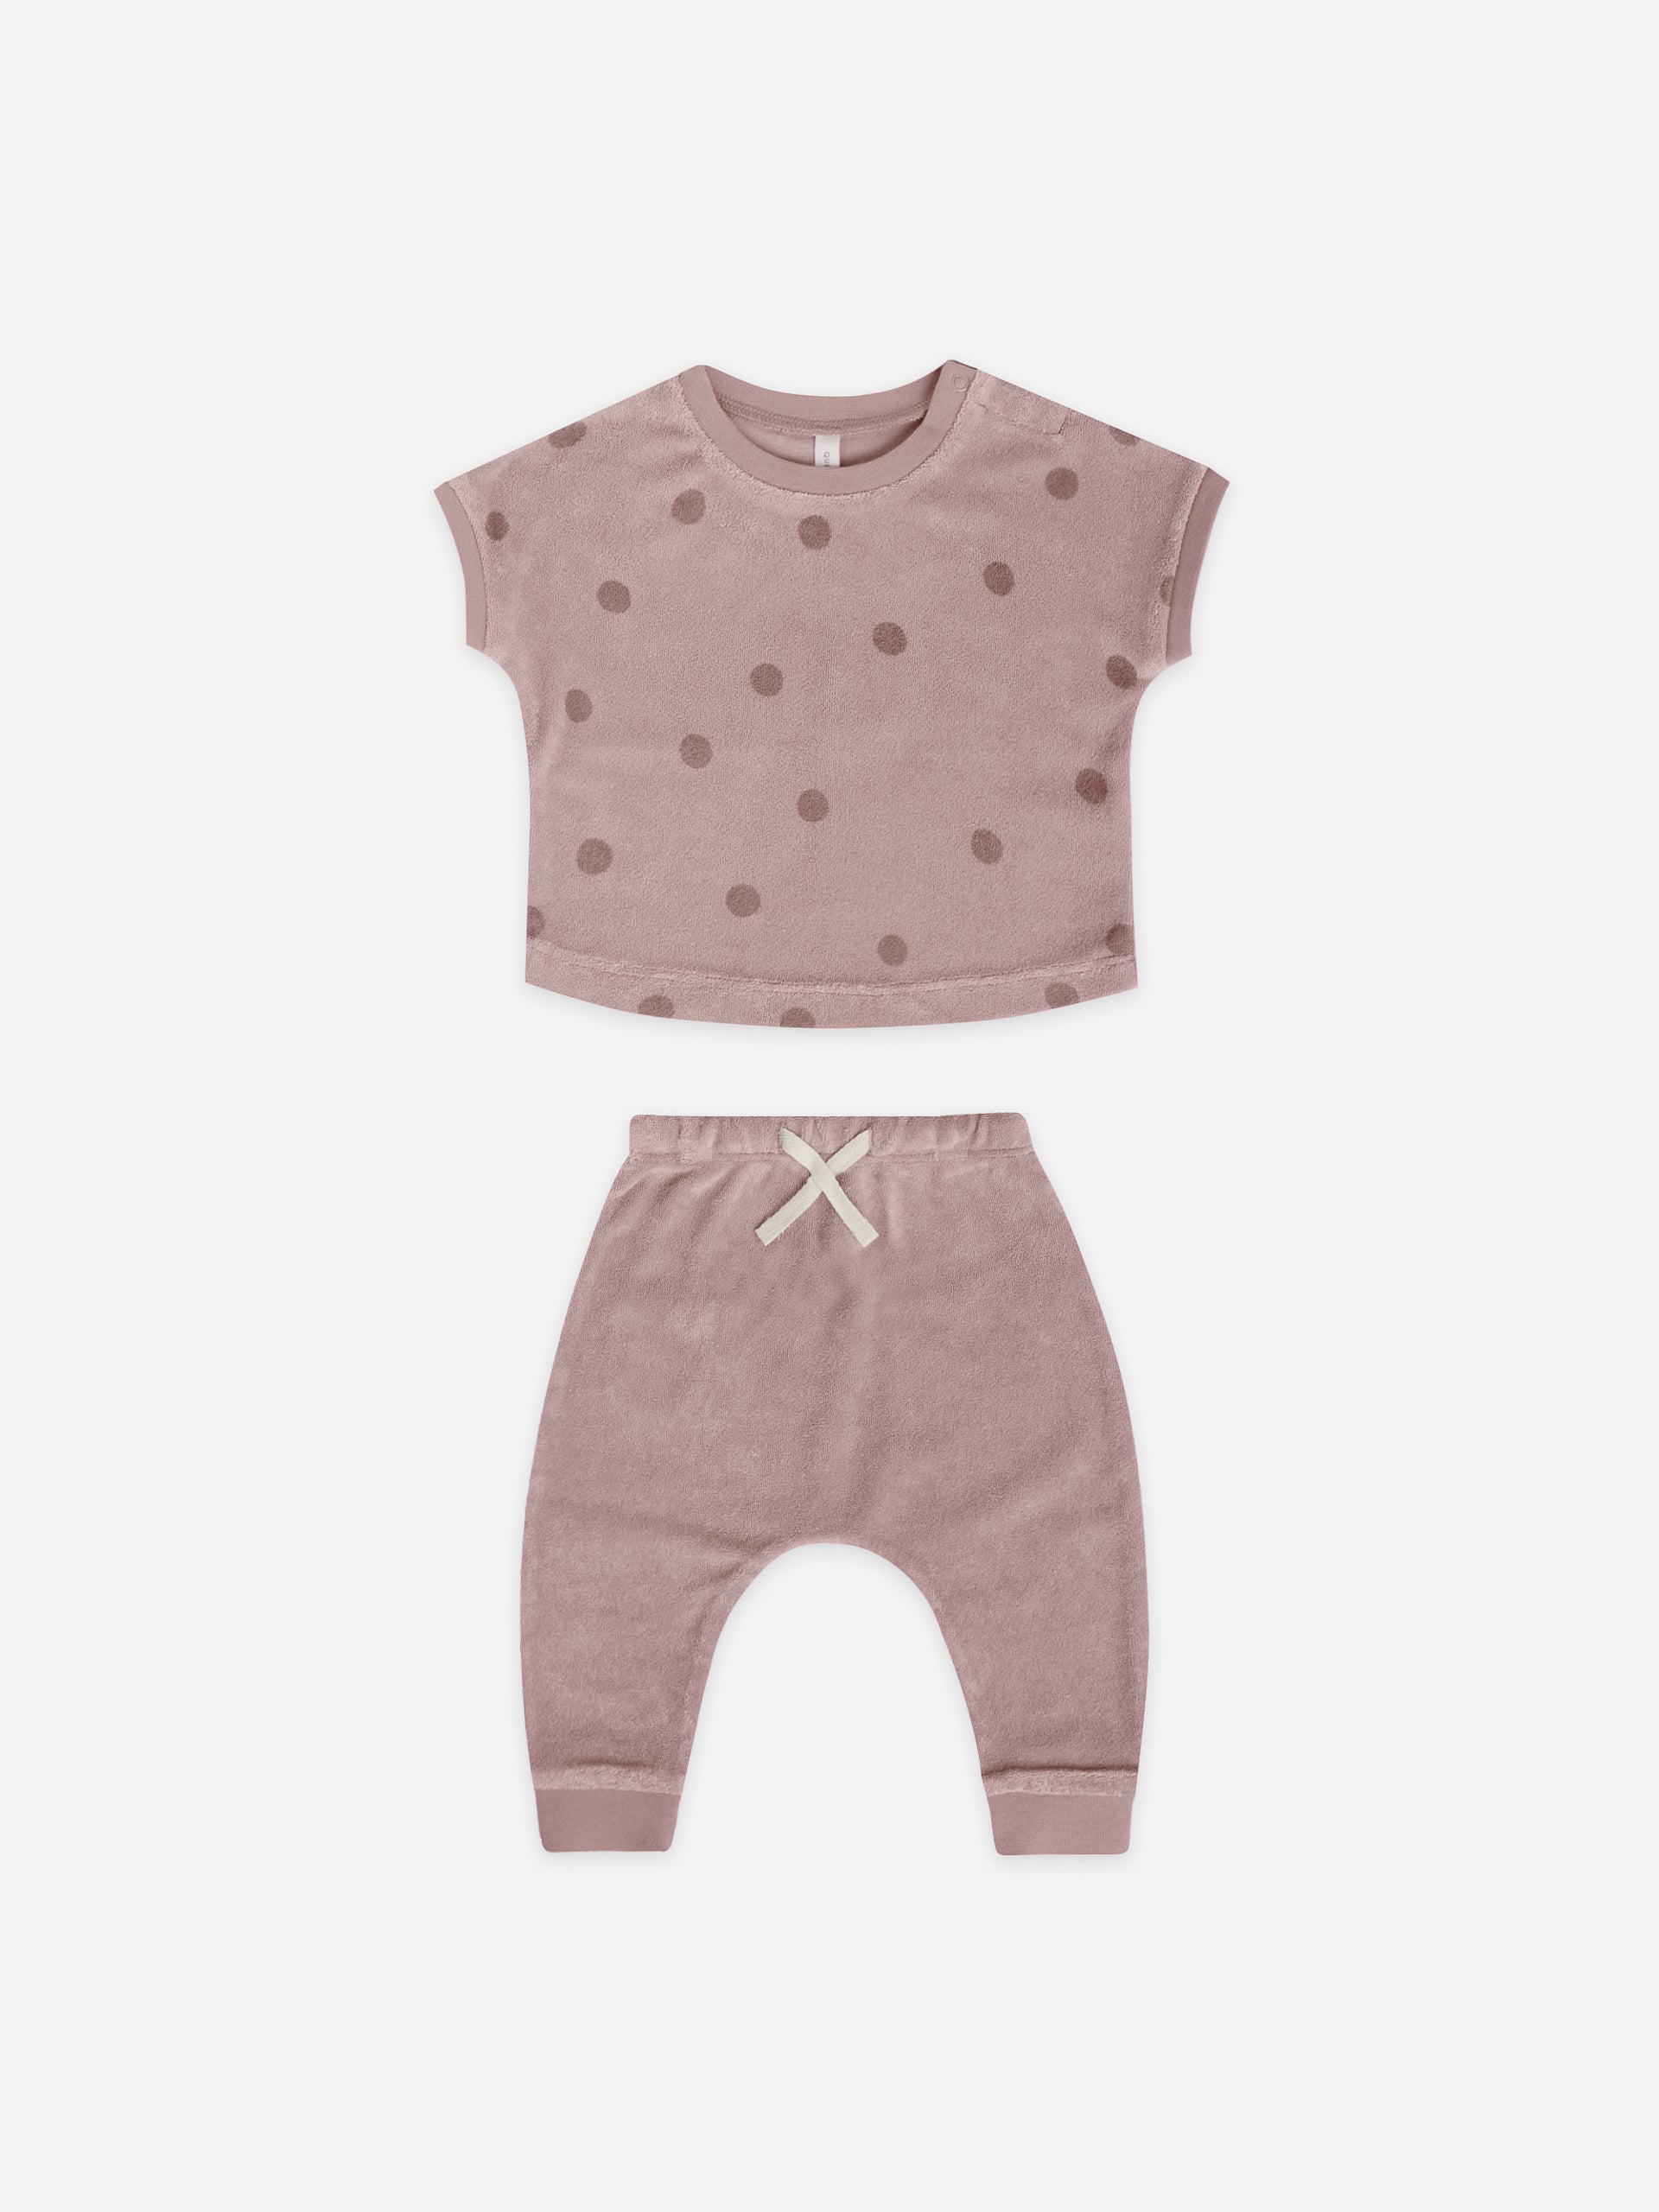 terry tee set | dots - Quincy Mae | Baby Basics | Baby Clothing | Organic Baby Clothes | Modern Baby Boy Clothes |